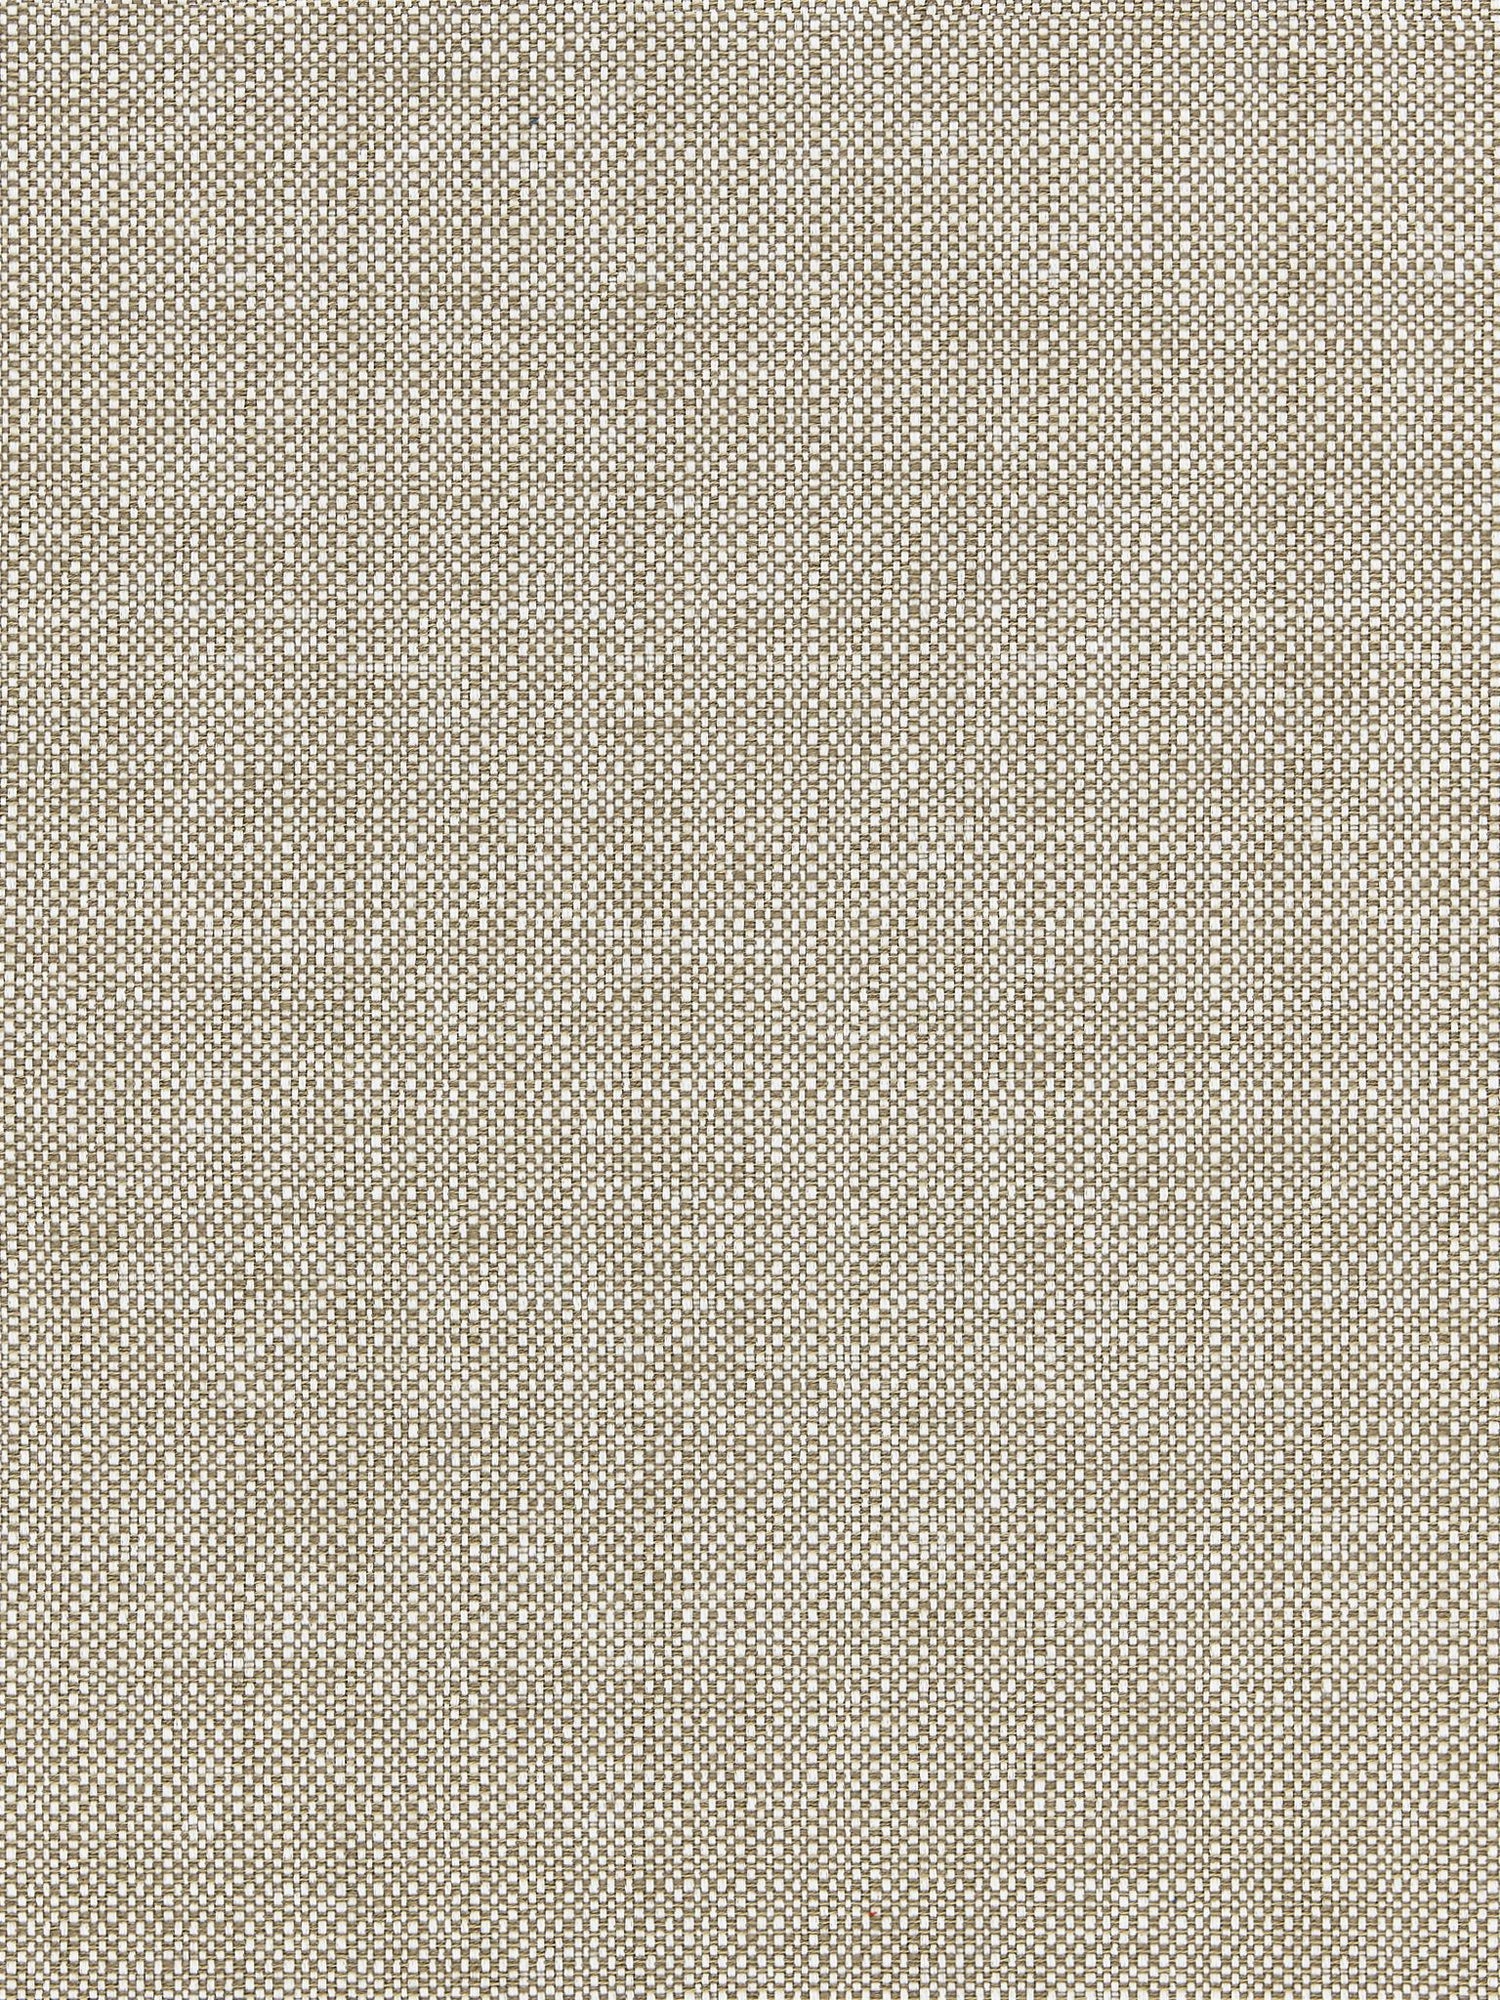 Chester Weave fabric in cocoa color - pattern number BK 0005K65118 - by Scalamandre in the Old World Weavers collection